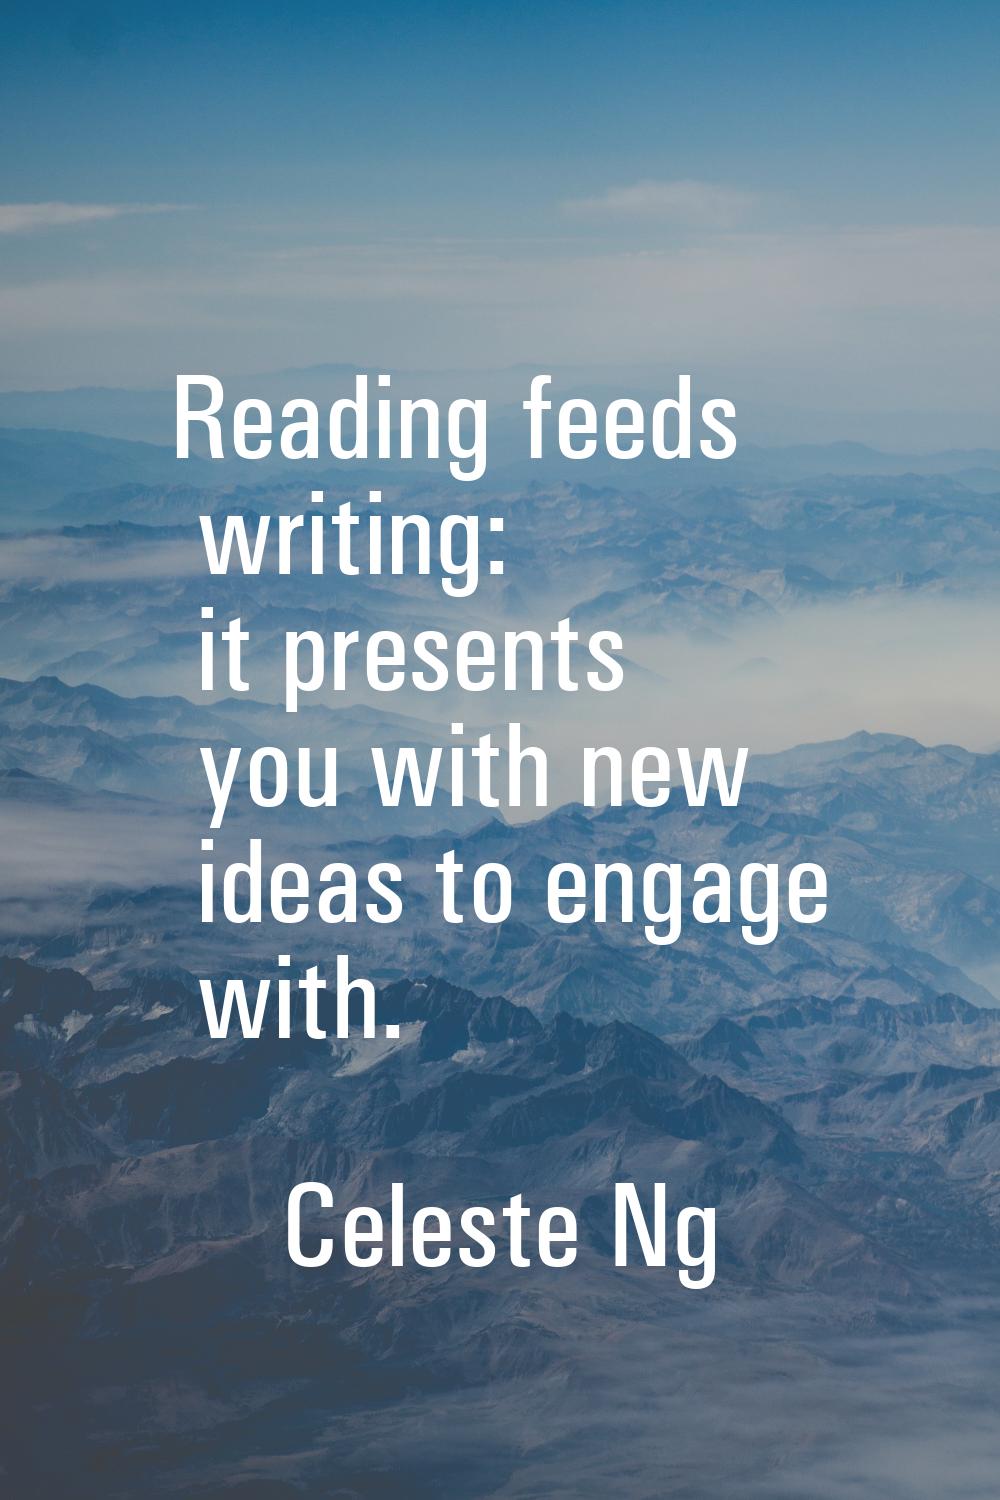 Reading feeds writing: it presents you with new ideas to engage with.